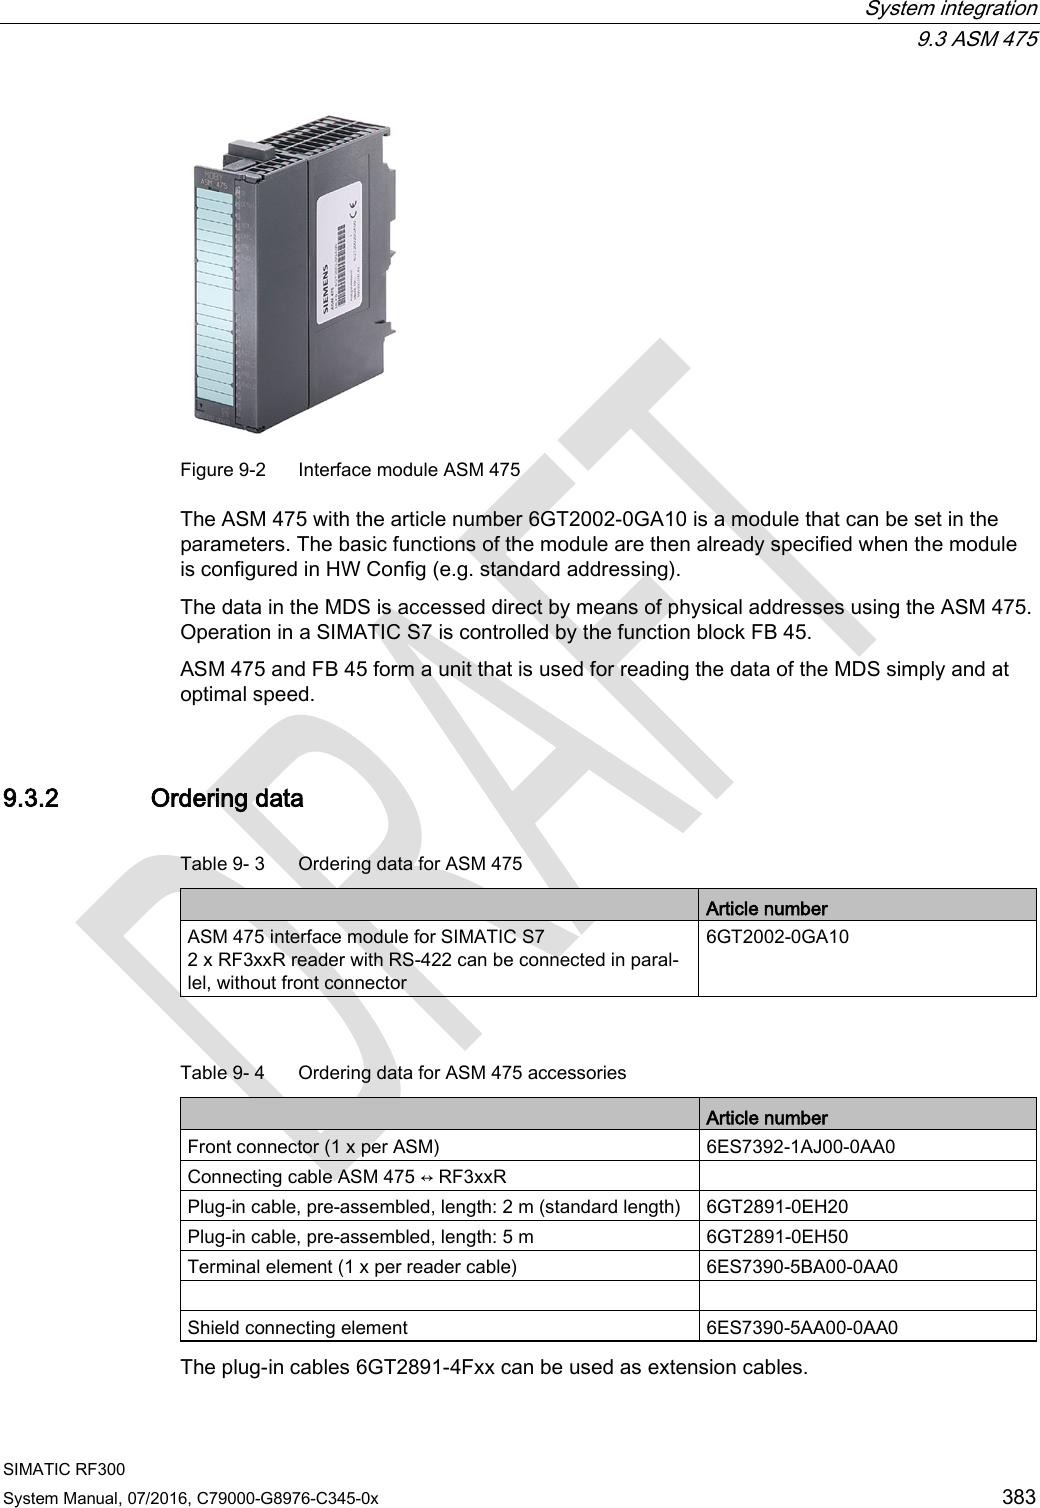  System integration  9.3 ASM 475 SIMATIC RF300 System Manual, 07/2016, C79000-G8976-C345-0x 383  Figure 9-2  Interface module ASM 475 The ASM 475 with the article number 6GT2002-0GA10 is a module that can be set in the parameters. The basic functions of the module are then already specified when the module is configured in HW Config (e.g. standard addressing). The data in the MDS is accessed direct by means of physical addresses using the ASM 475. Operation in a SIMATIC S7 is controlled by the function block FB 45. ASM 475 and FB 45 form a unit that is used for reading the data of the MDS simply and at optimal speed. 9.3.2 Ordering data Table 9- 3  Ordering data for ASM 475  Article number ASM 475 interface module for SIMATIC S7  2 x RF3xxR reader with RS-422 can be connected in paral-lel, without front connector 6GT2002-0GA10  Table 9- 4  Ordering data for ASM 475 accessories  Article number Front connector (1 x per ASM) 6ES7392-1AJ00-0AA0 Connecting cable ASM 475 ↔ RF3xxR  Plug-in cable, pre-assembled, length: 2 m (standard length) 6GT2891-0EH20 Plug-in cable, pre-assembled, length: 5 m 6GT2891-0EH50 Terminal element (1 x per reader cable) 6ES7390-5BA00-0AA0   Shield connecting element 6ES7390-5AA00-0AA0 The plug-in cables 6GT2891-4Fxx can be used as extension cables.  